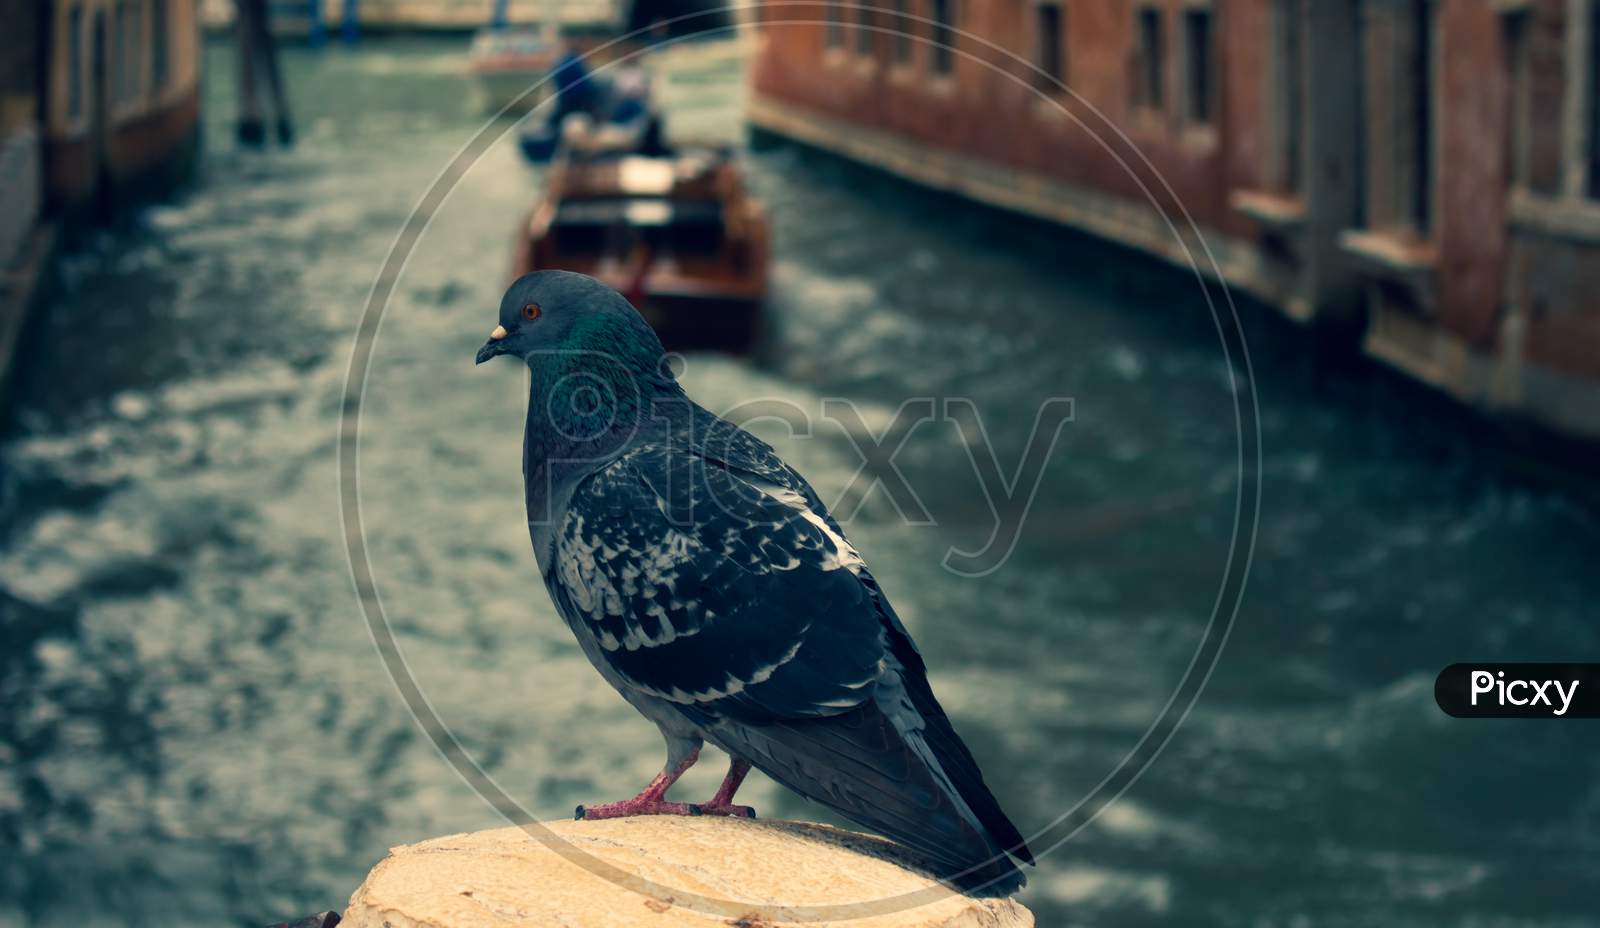 Dark Colored Pigeon Standing On A Stone Pillar In The City Of Venice. Flying City Rat. Dark Feathered Bird